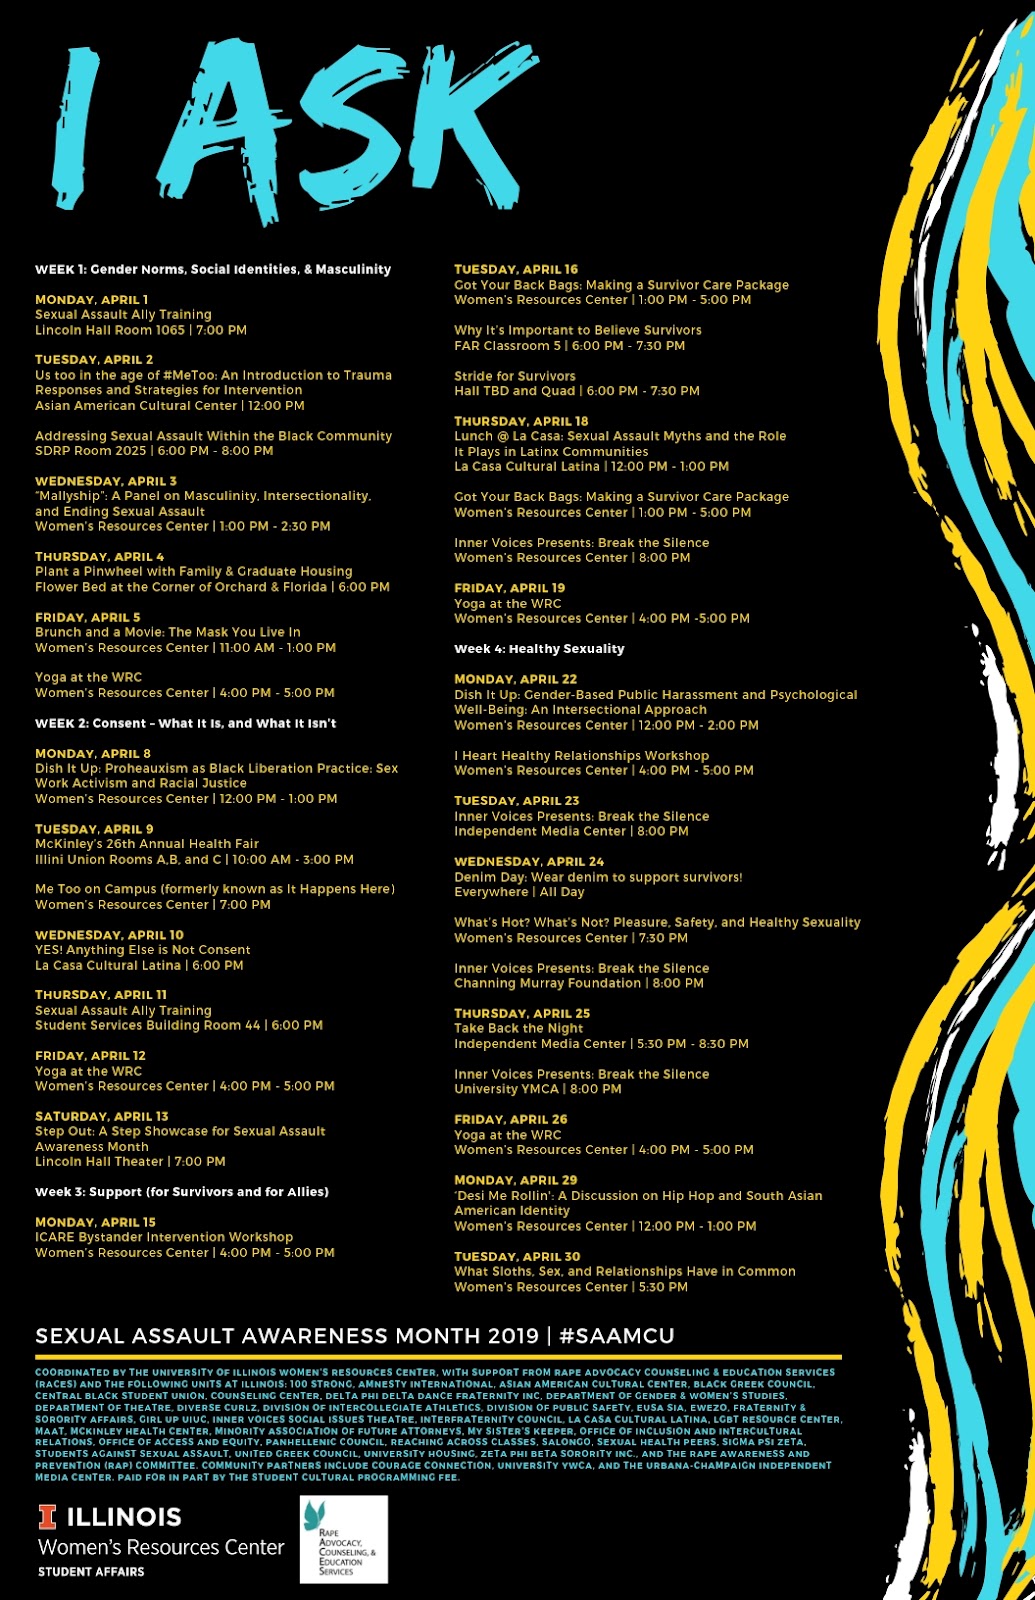 Sexual Assault Awareness Month 2019 schedule poster with 'I Ask' blue text, black background, and yellow, blue and white wavy lines on right border